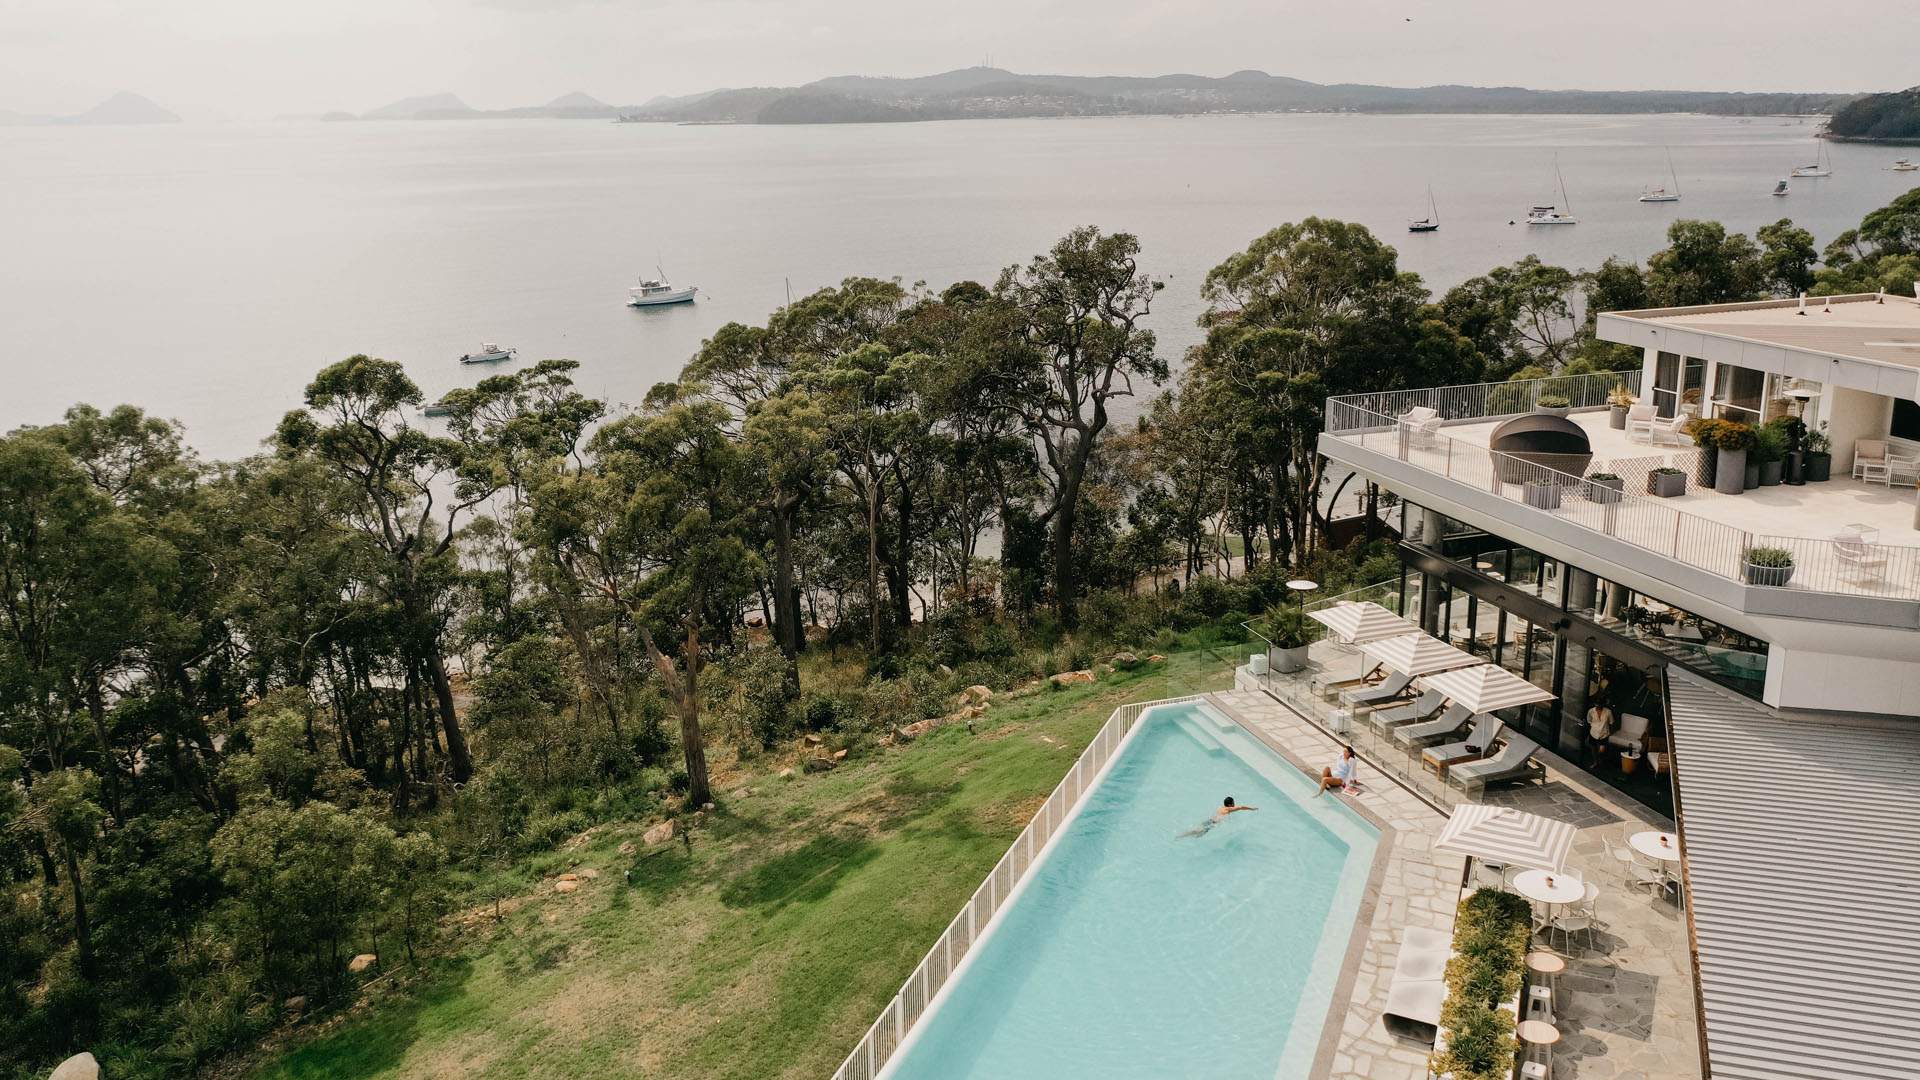 How to Spend an Indulgent Weekend Away In Port Stephens